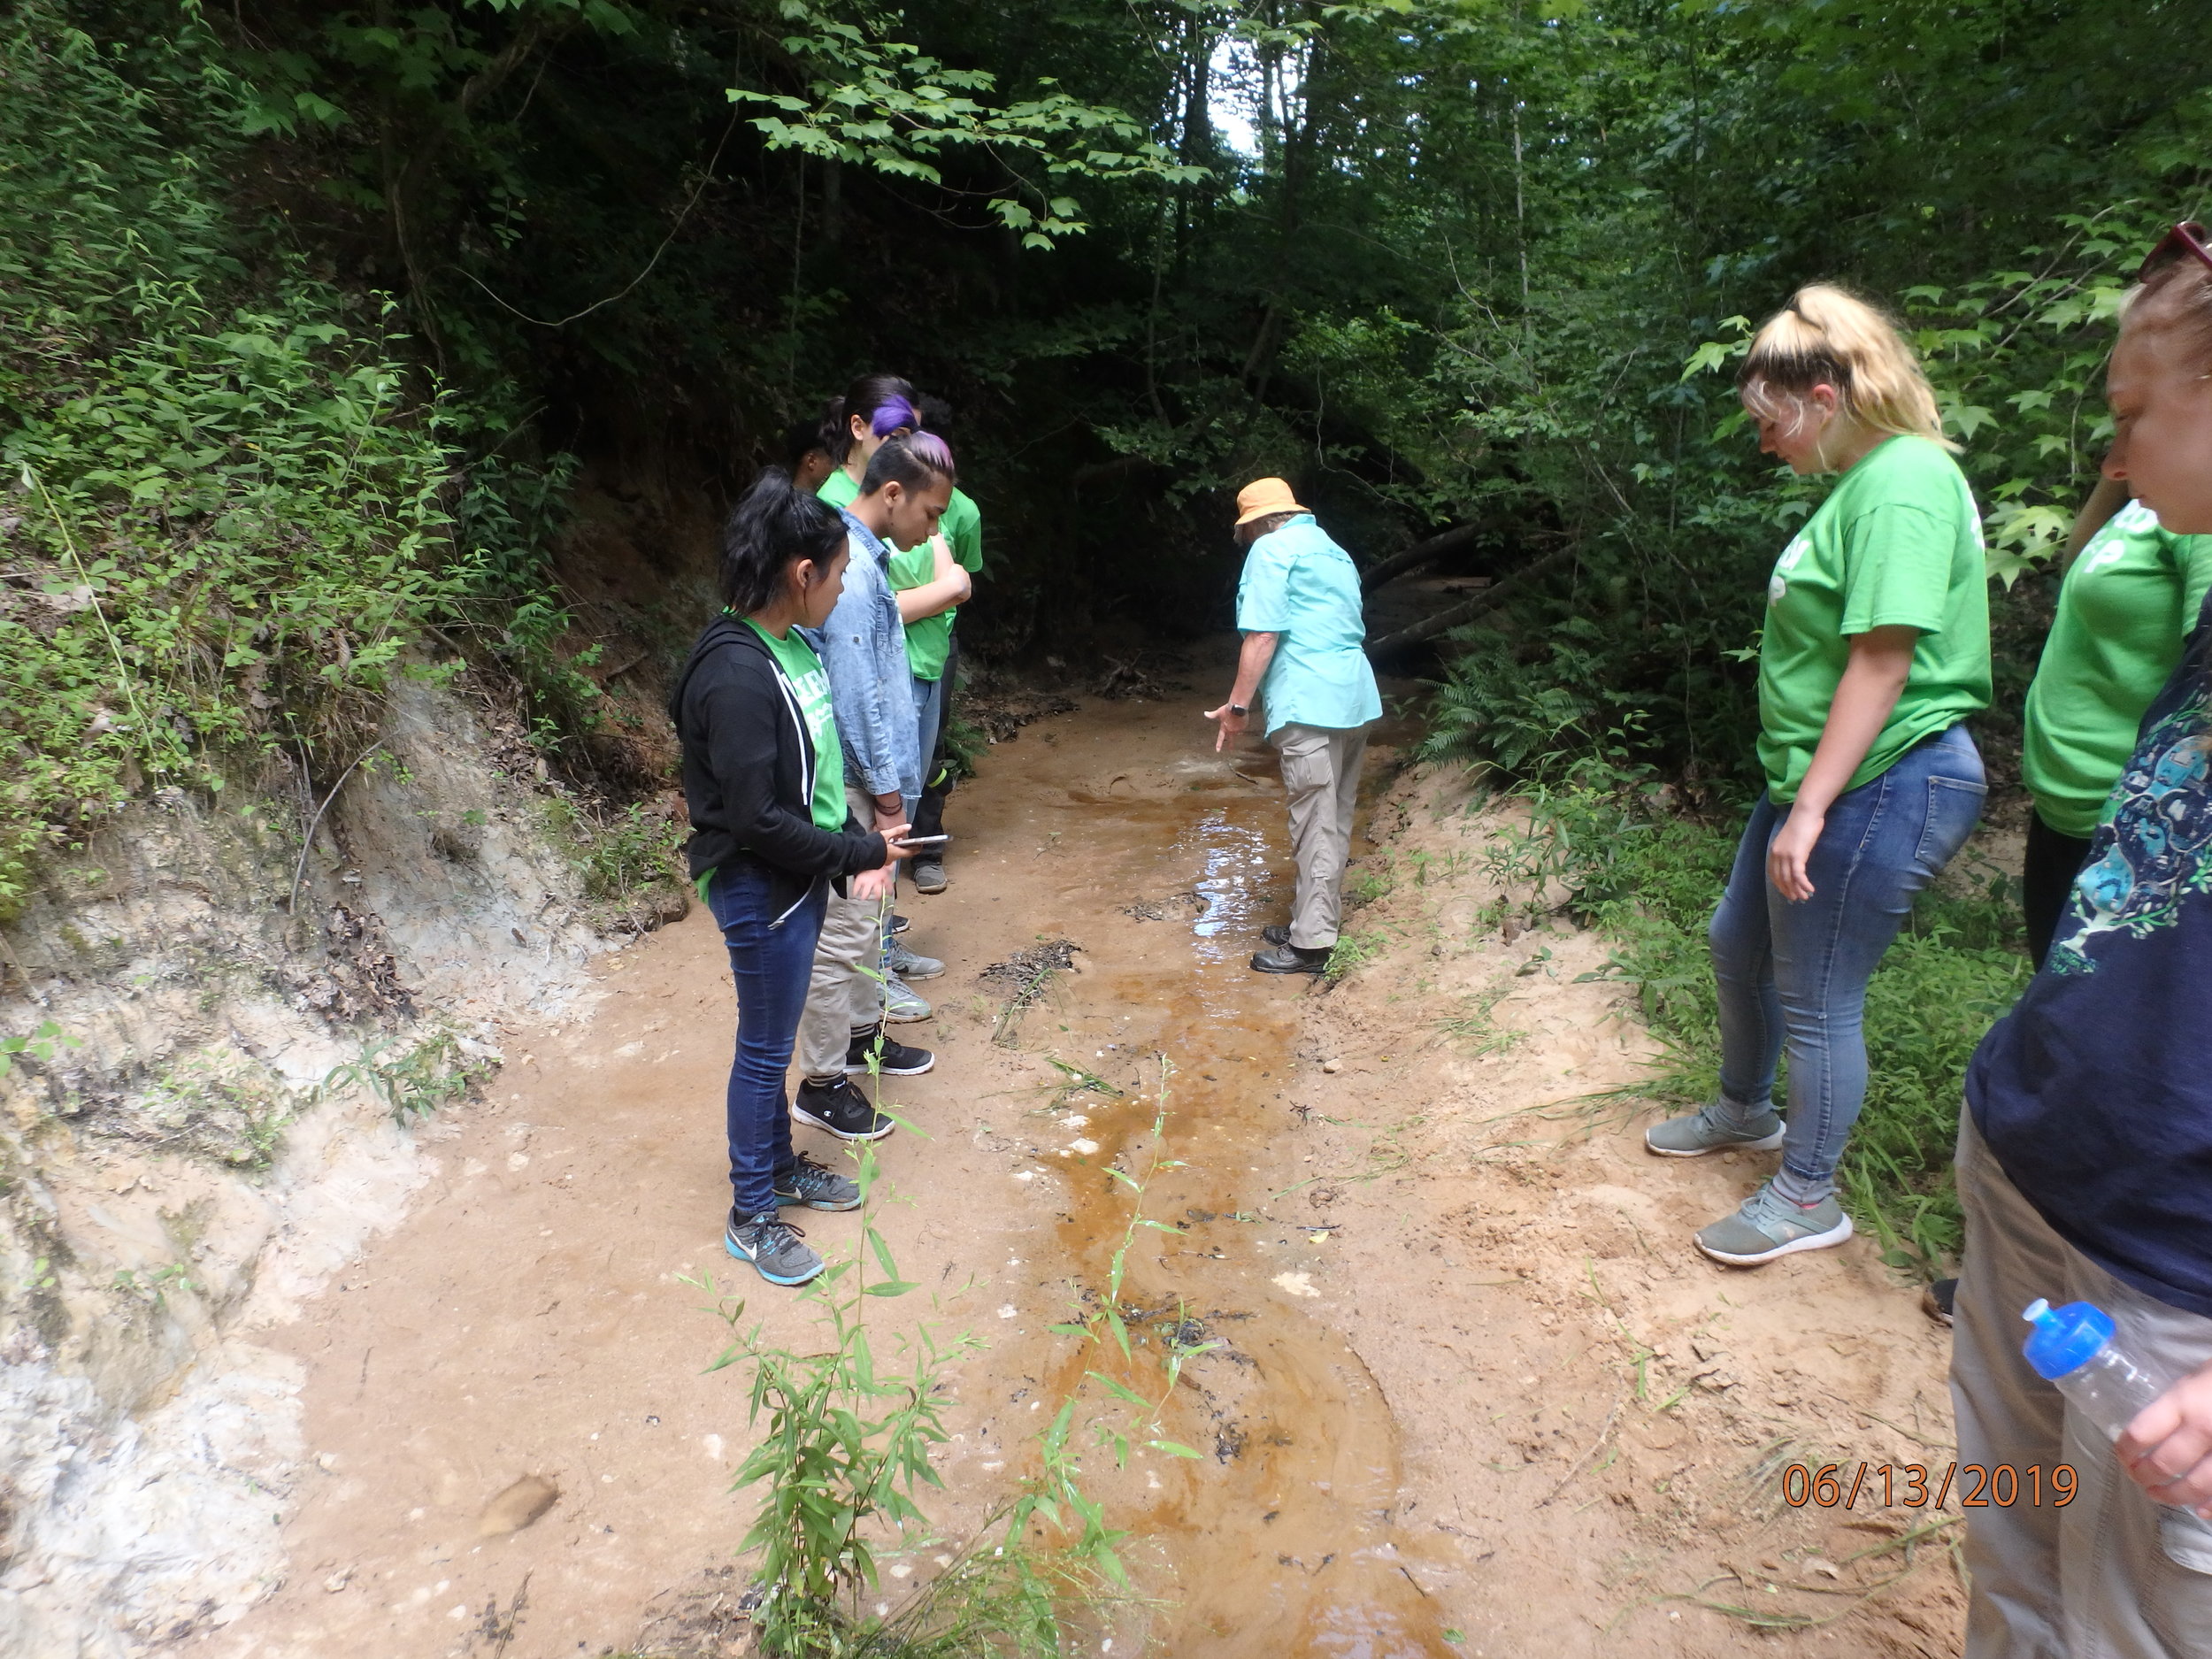 Day 4: Pinecrest Camp, Layers of the Aquifer